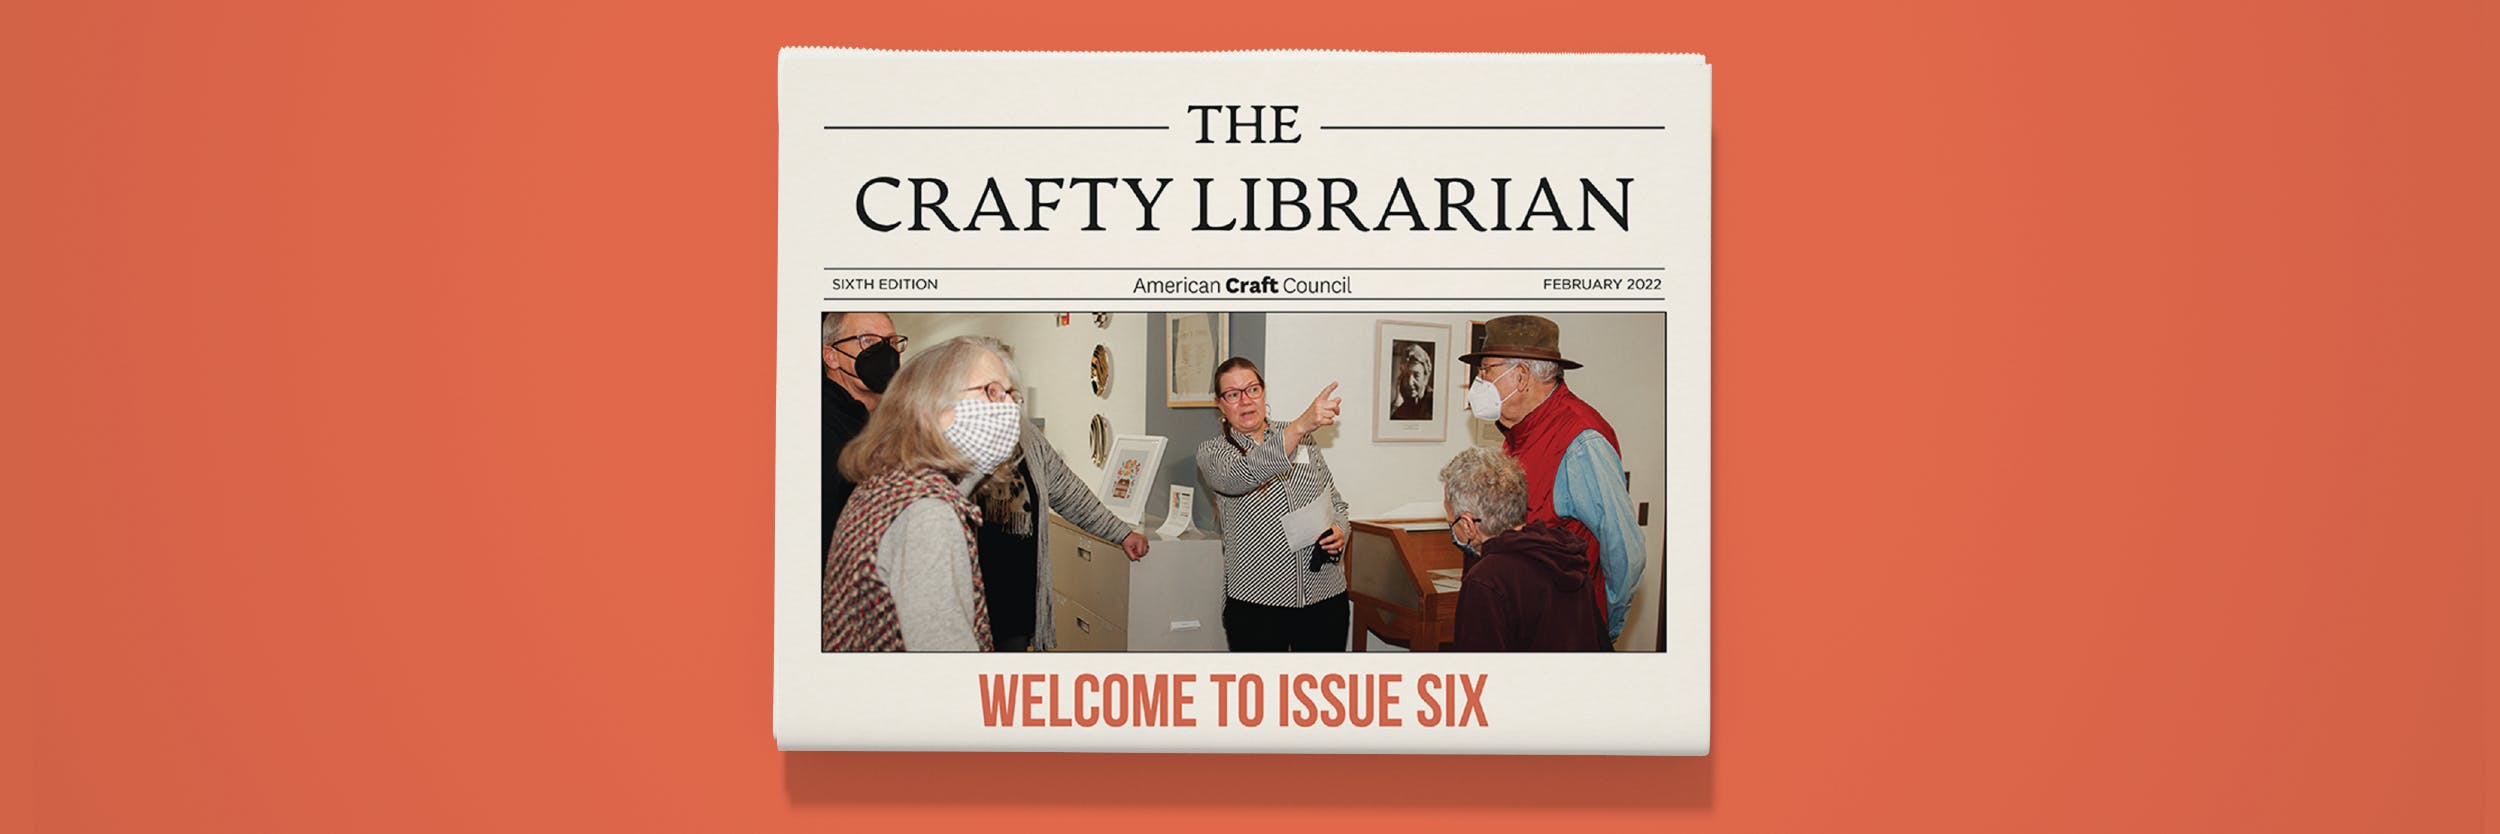 The Crafty Librarian Issue 06 Winter 2022